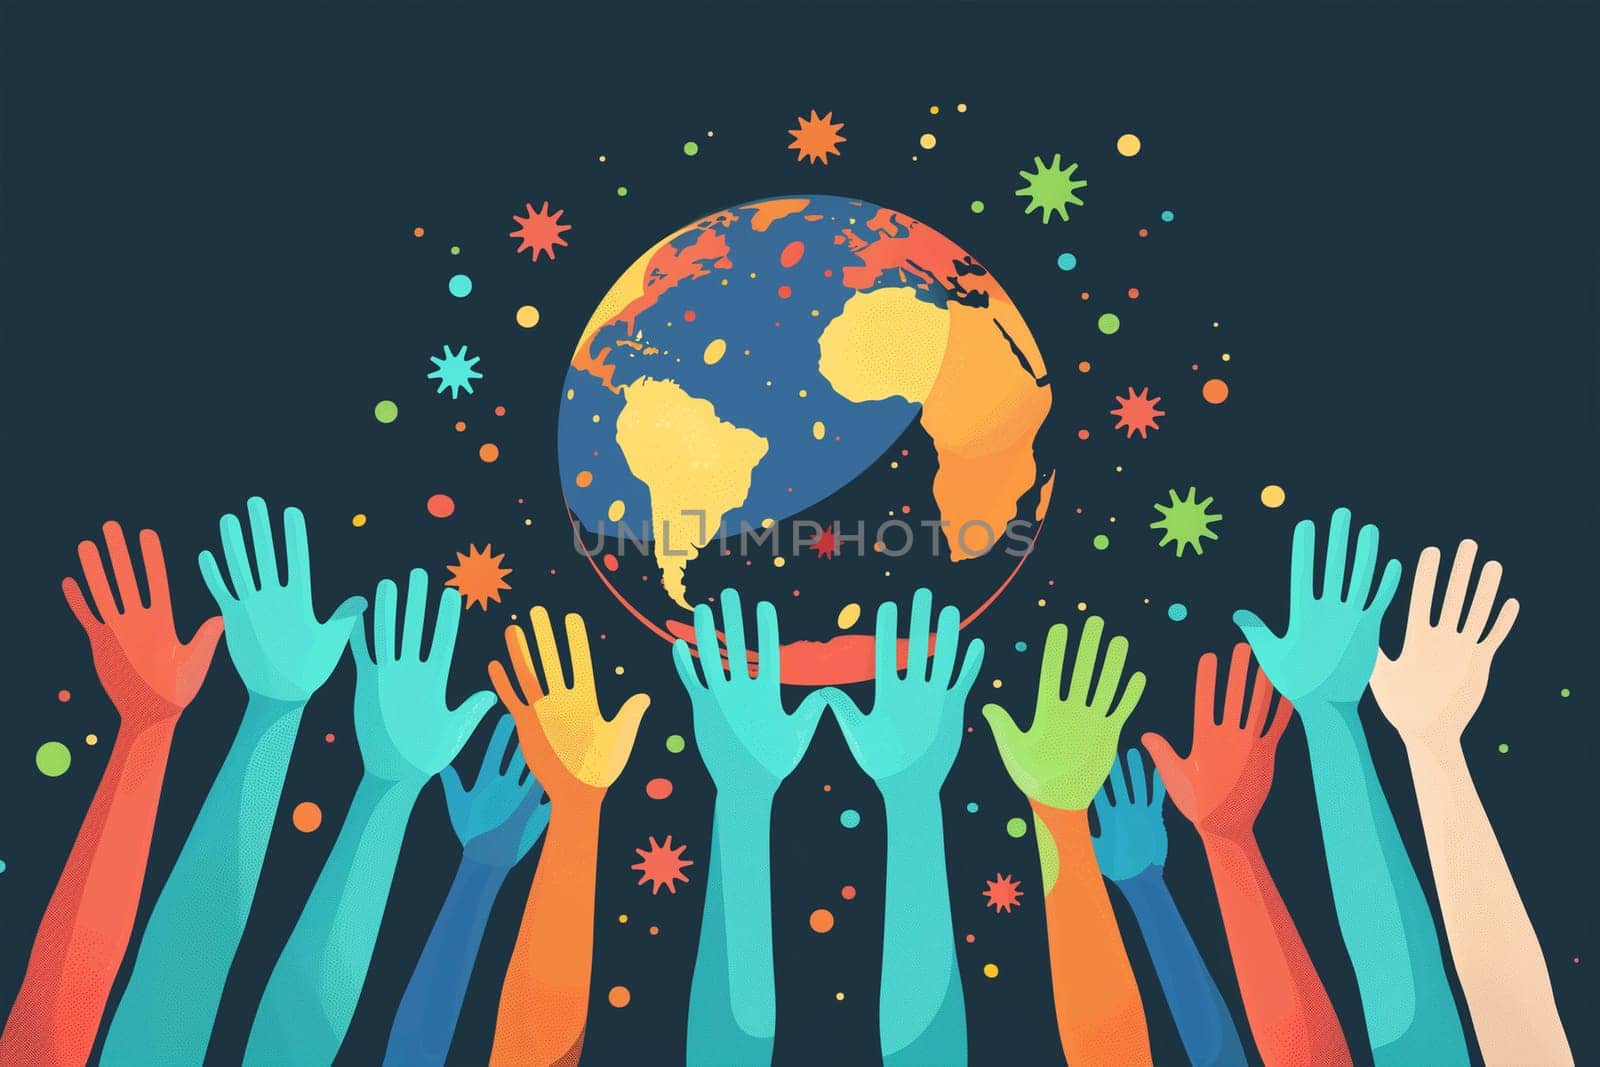 Multiple colorful hands reach up toward a globe, symbolizing unity and diversity on World Humanist Day.